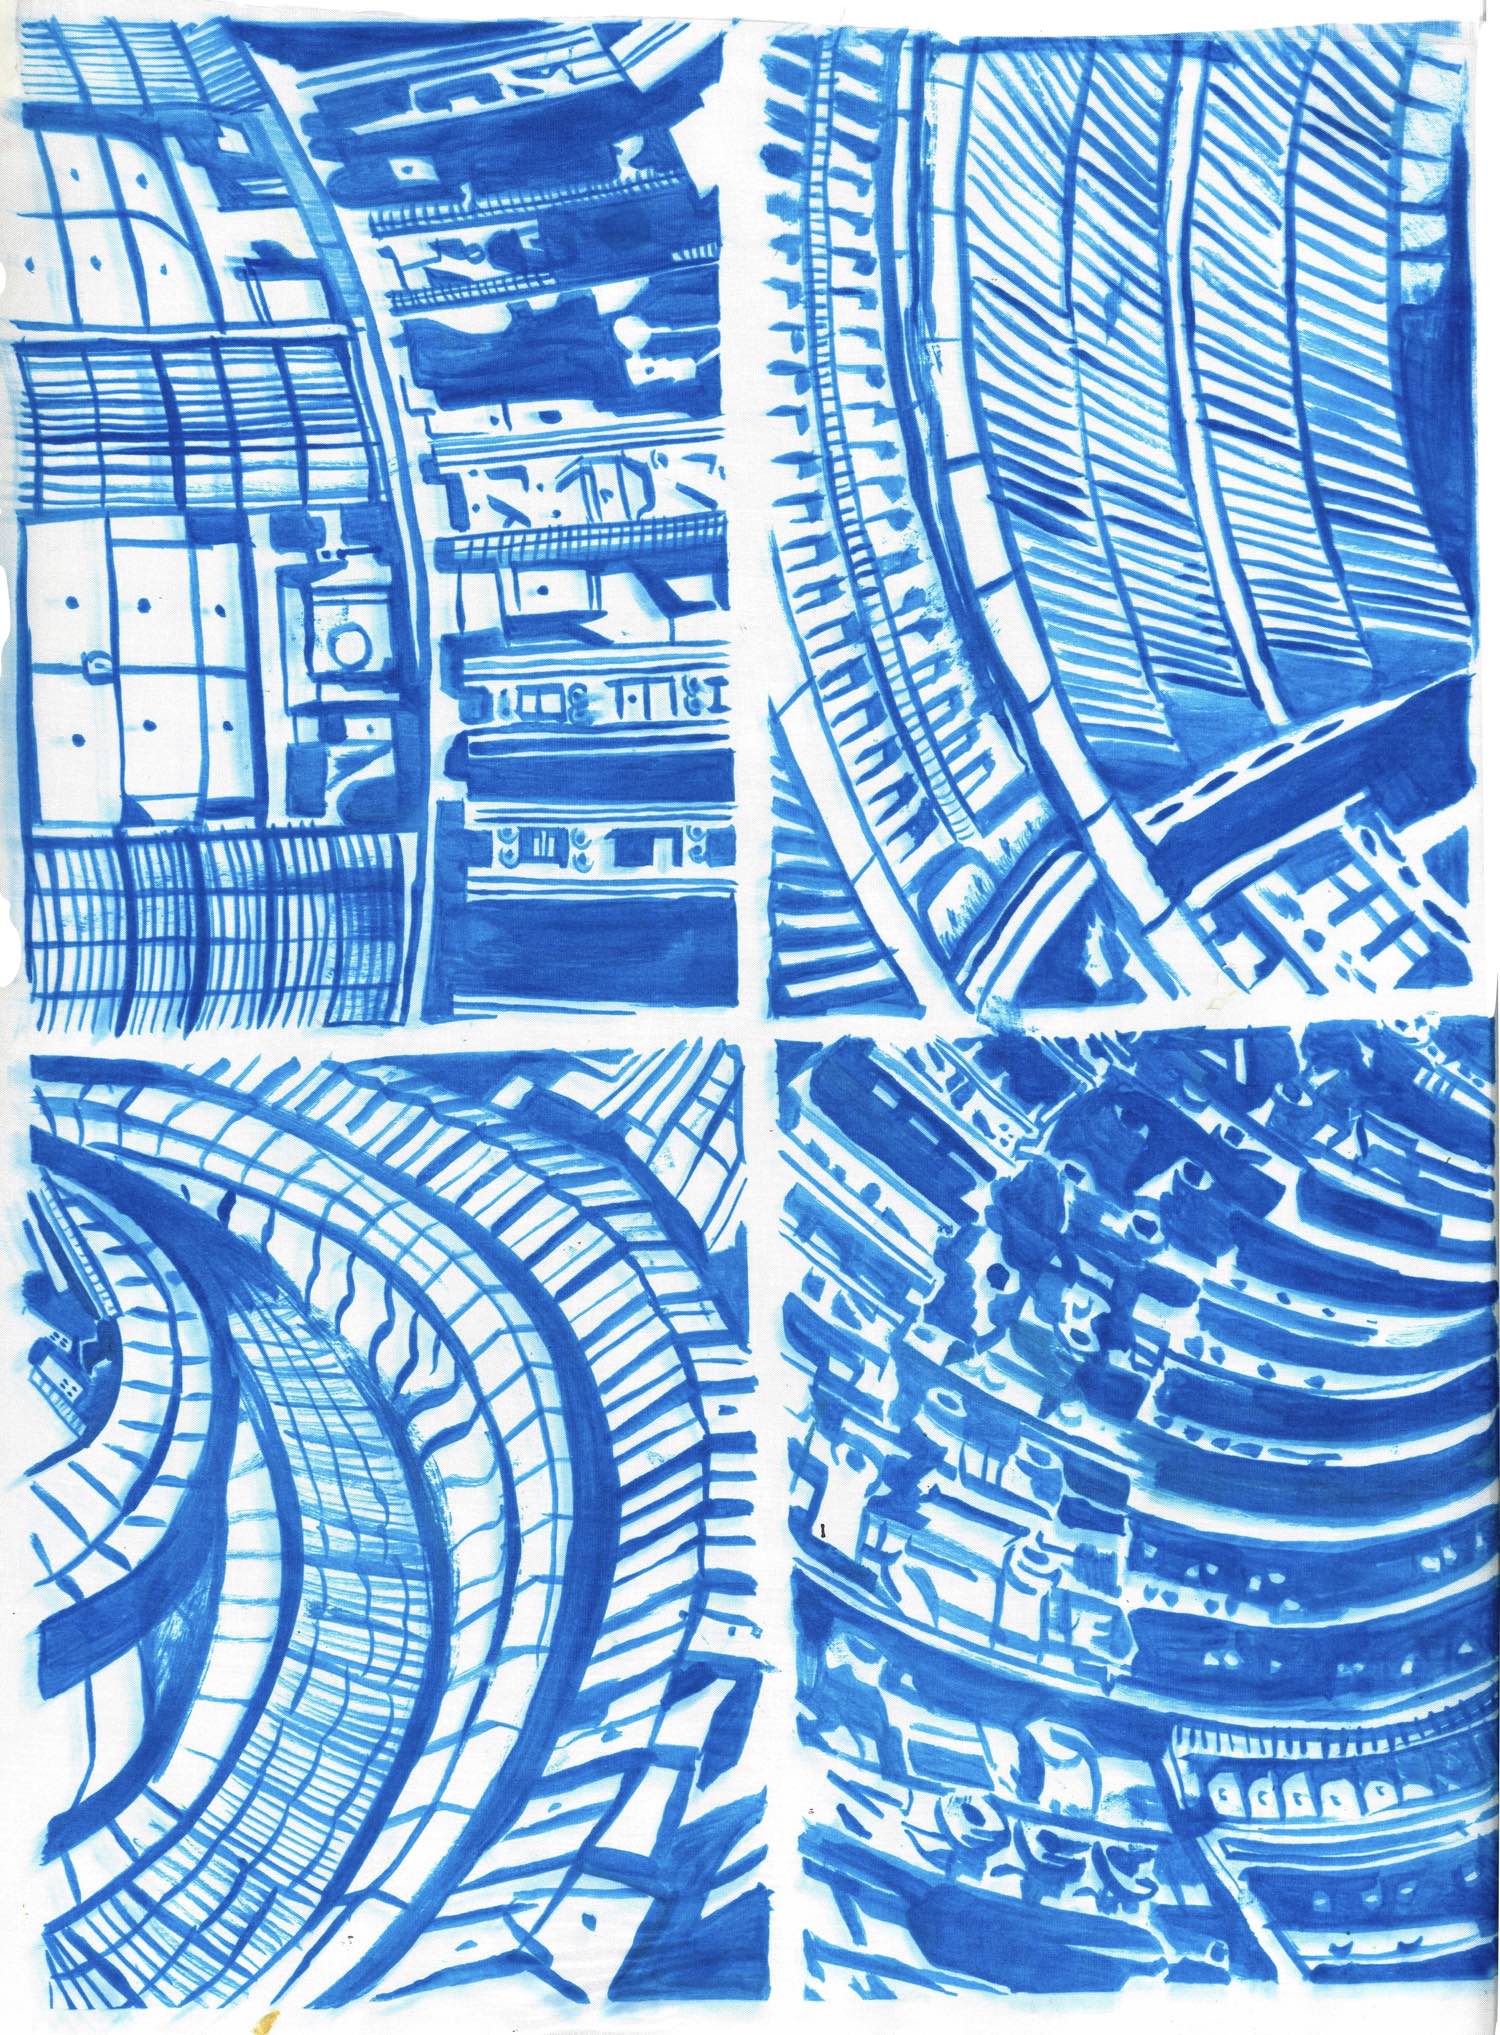 Abstract blue image blue in four panels of a fusion reactor